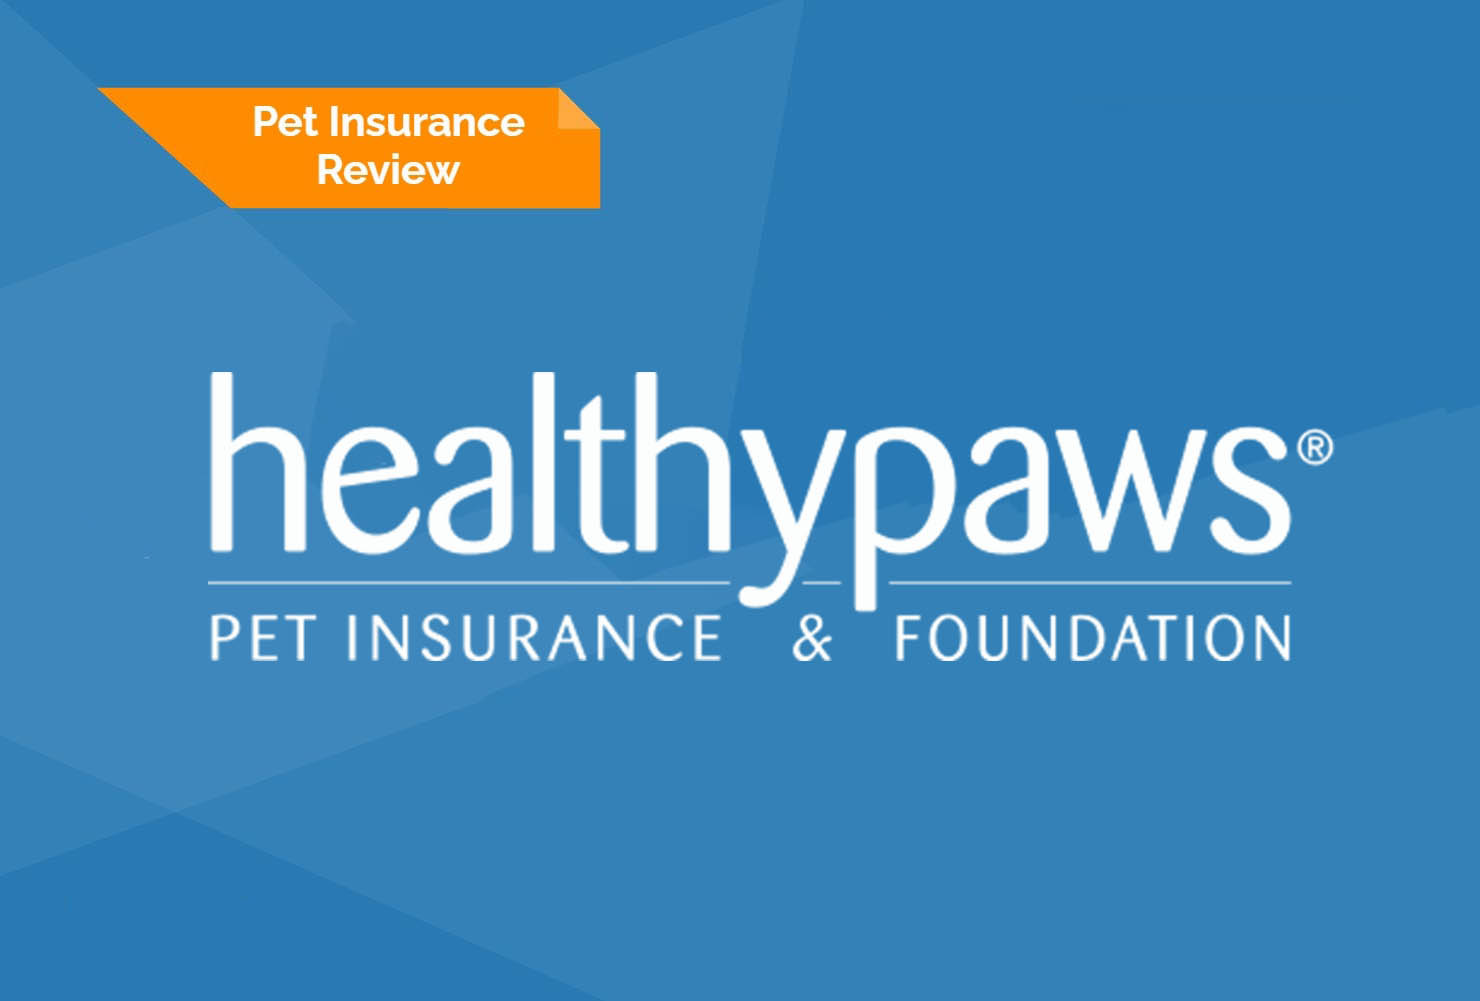 healthy paws featured image